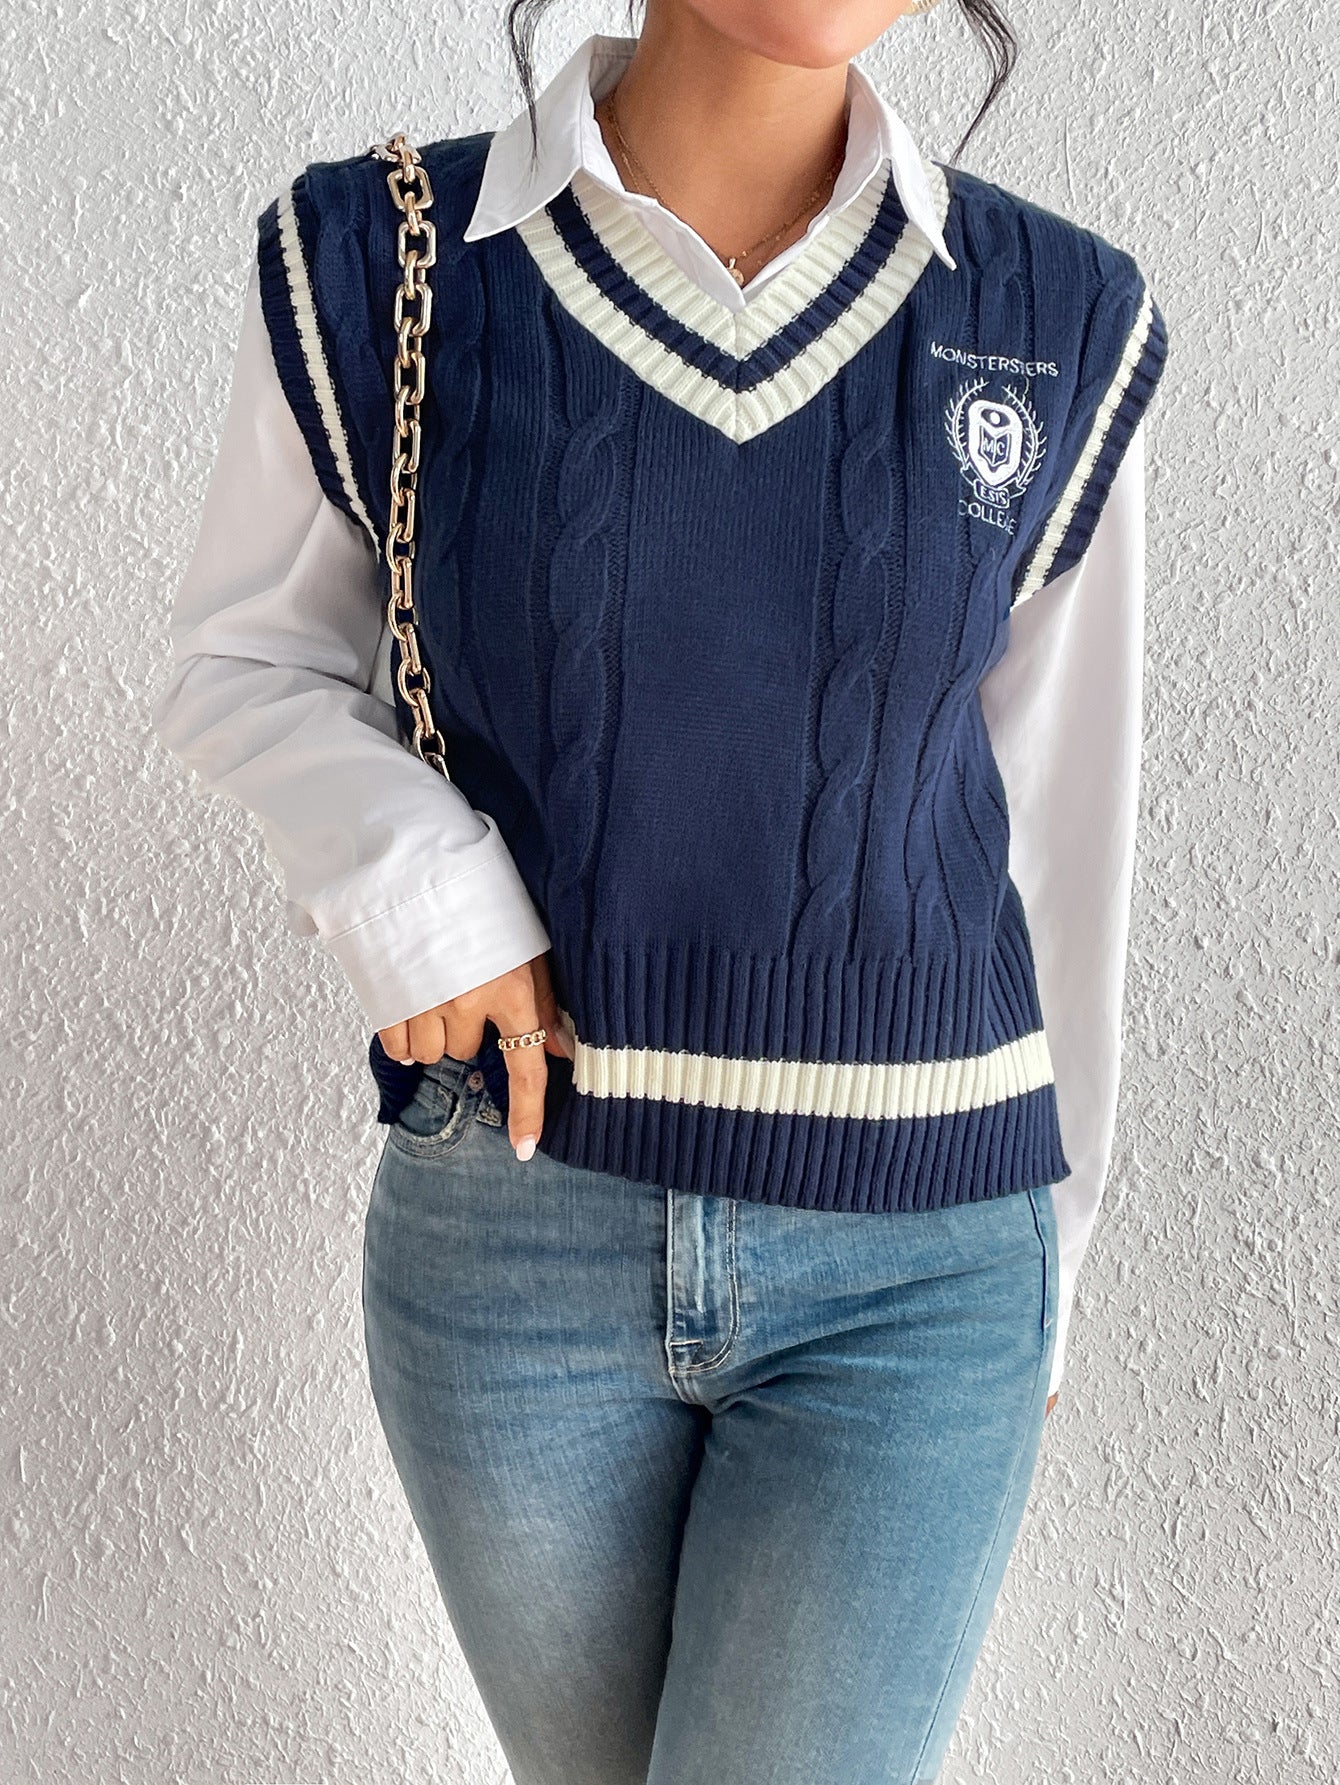 Autumn Winter University Solid Color Hemp Pattern Pullover Vest Knitted Sweater